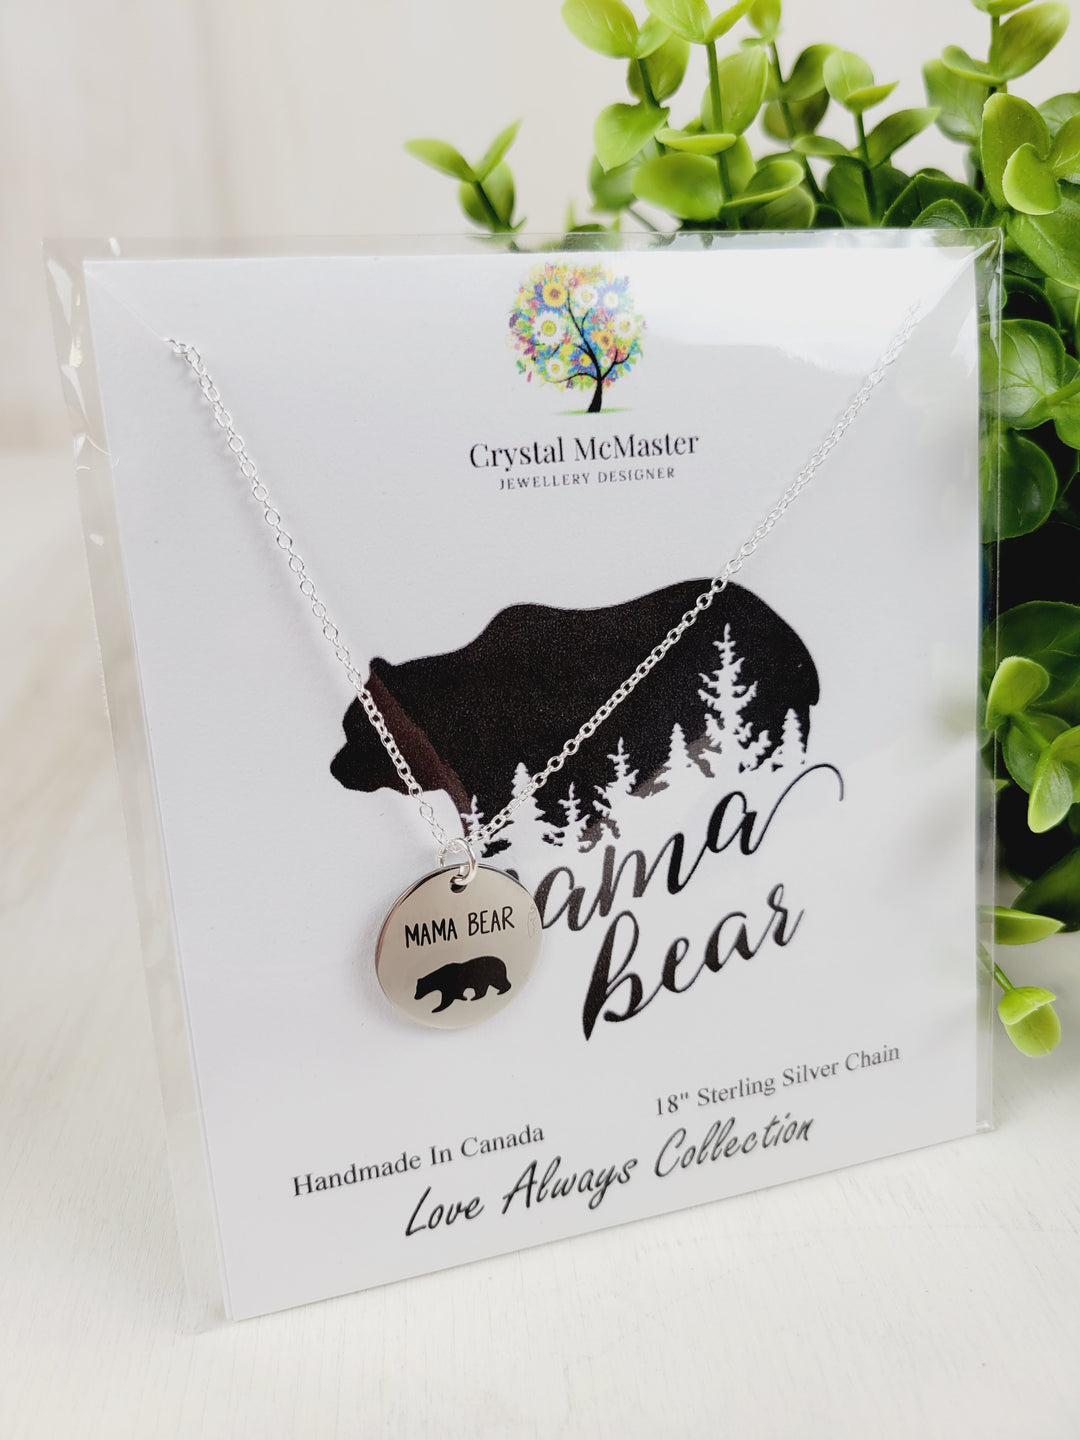 Crystal McMaster Jewellery, Sterling Silver Necklaces- Love Always Collection